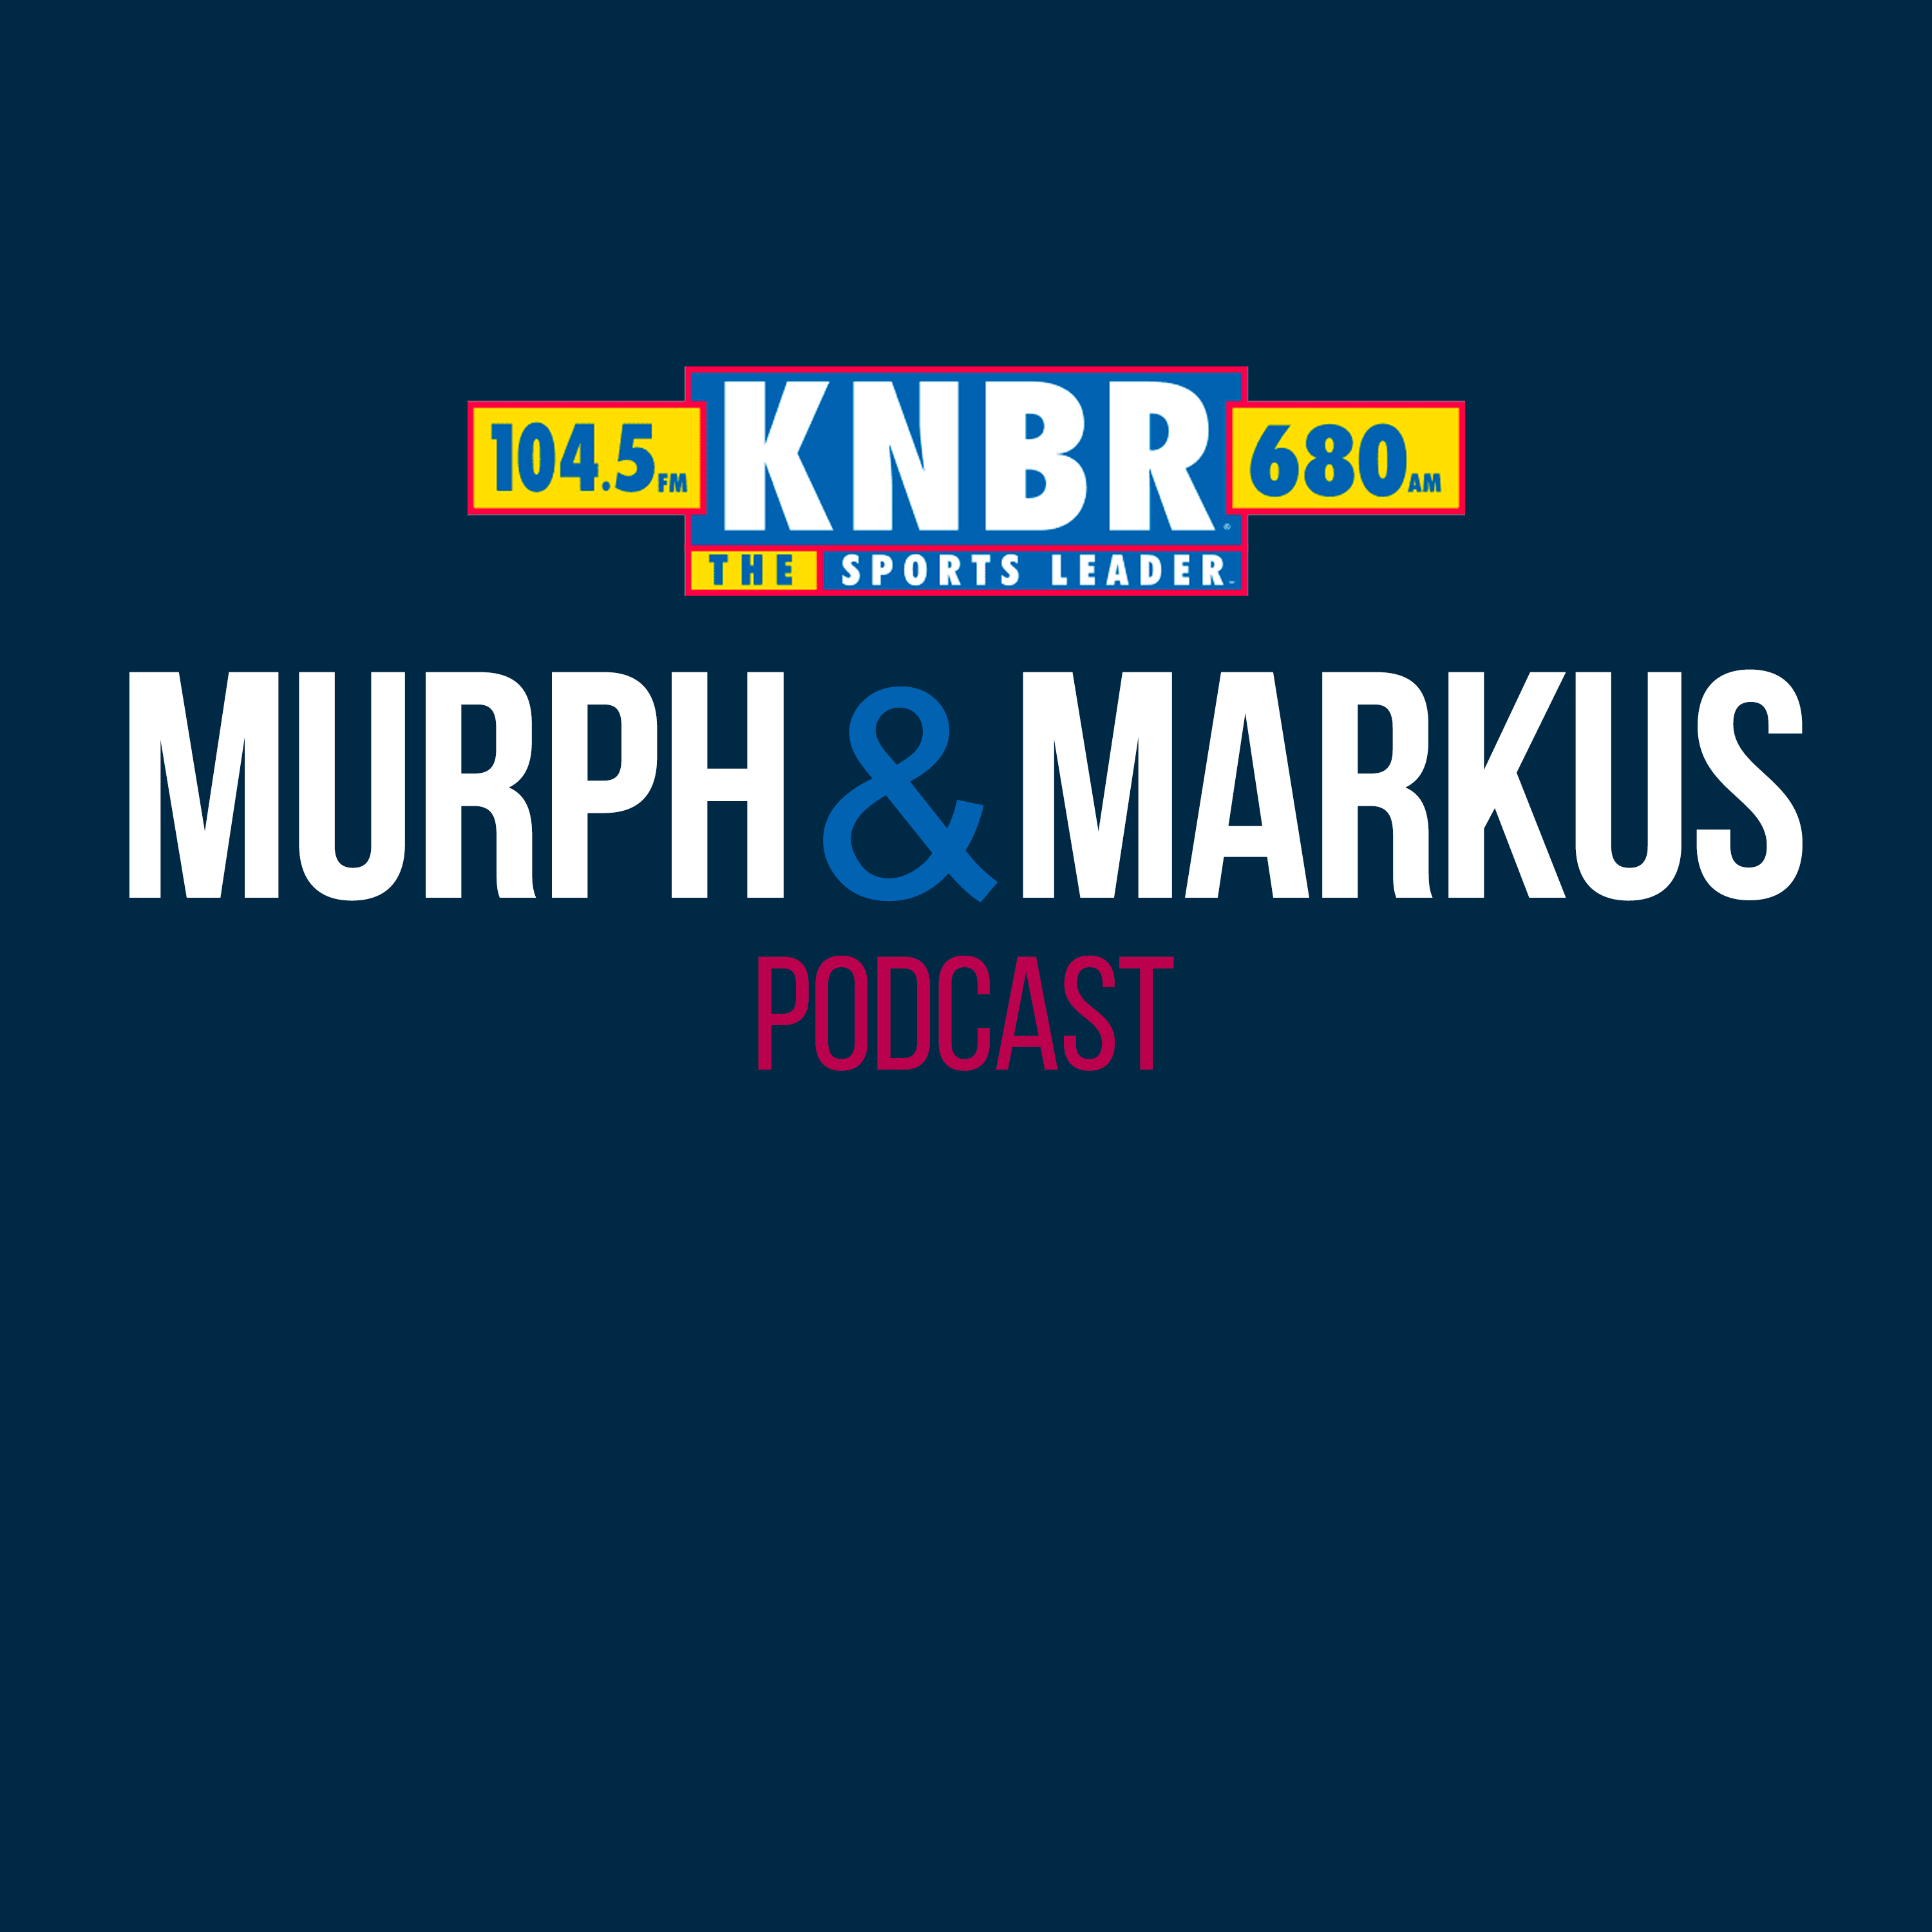 7-2 Hour 1: Murph & Markus react to Klay Thompson signing a three-year deal with the Dallas Mavericks, discuss how Klay will fit with the Mavs, and debate who the Warriors should target next